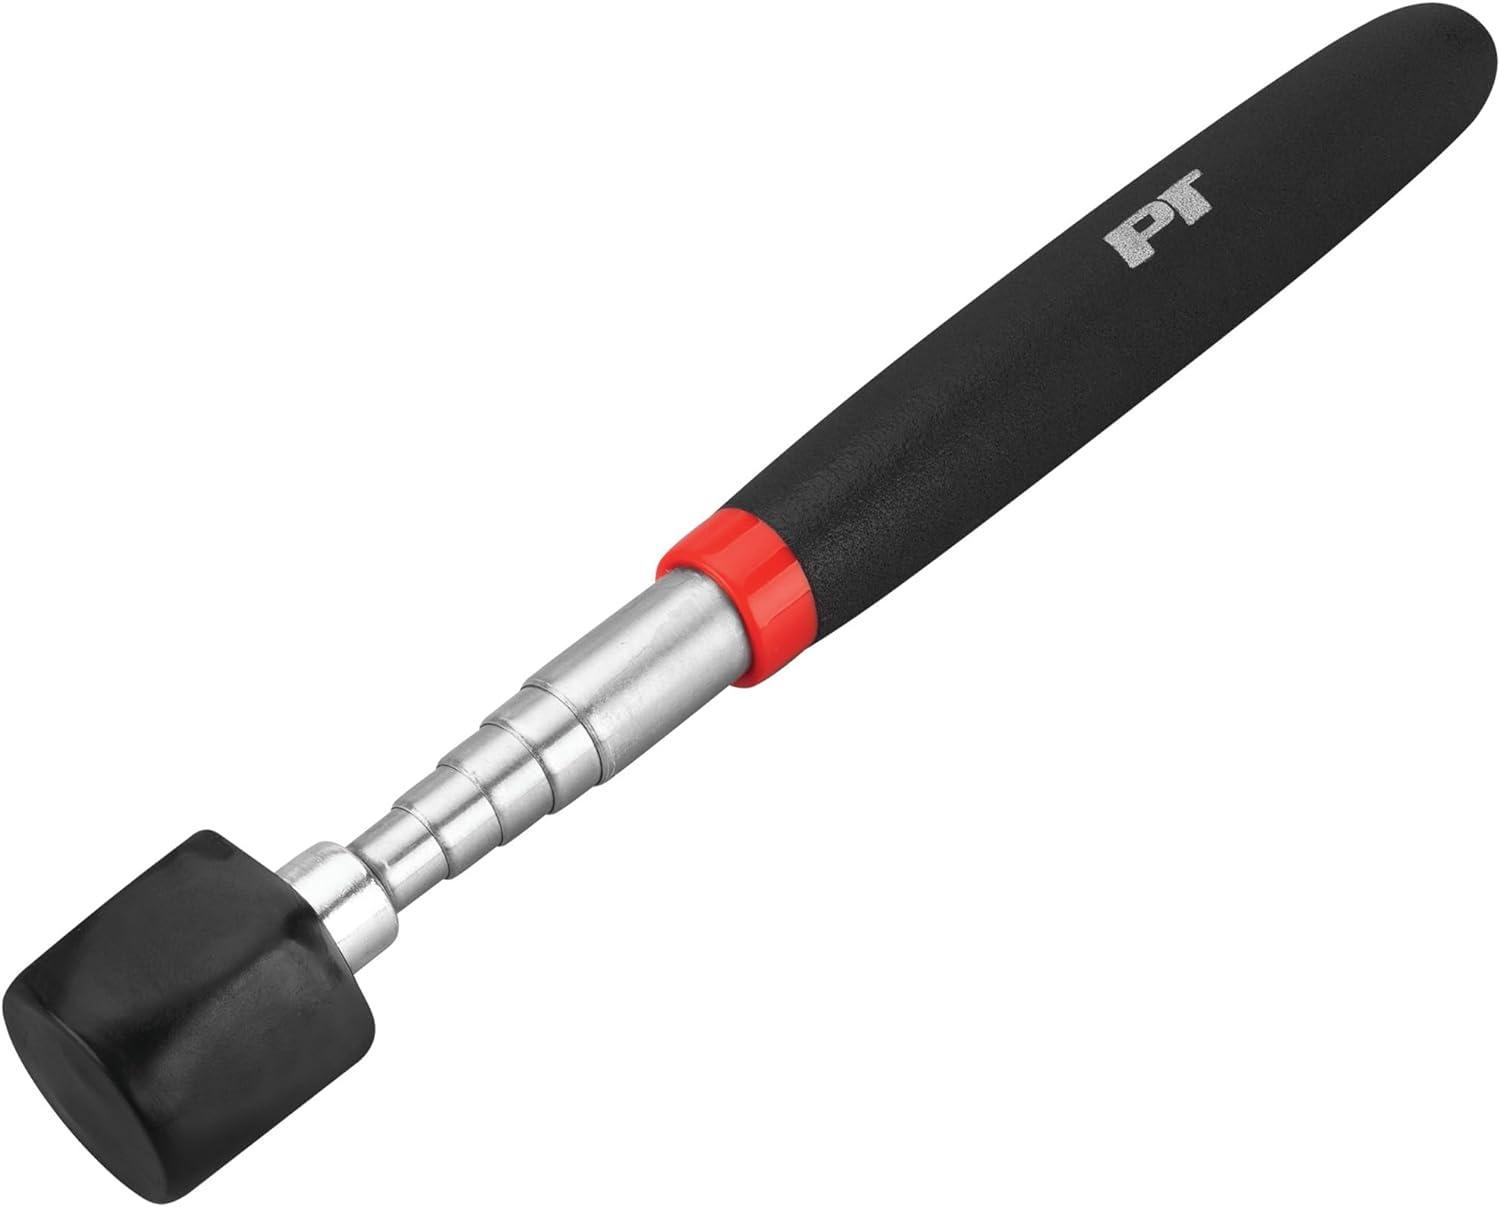 Performance Tool W9115 16-lb Magnetic Pick-Up Tool for $4.99